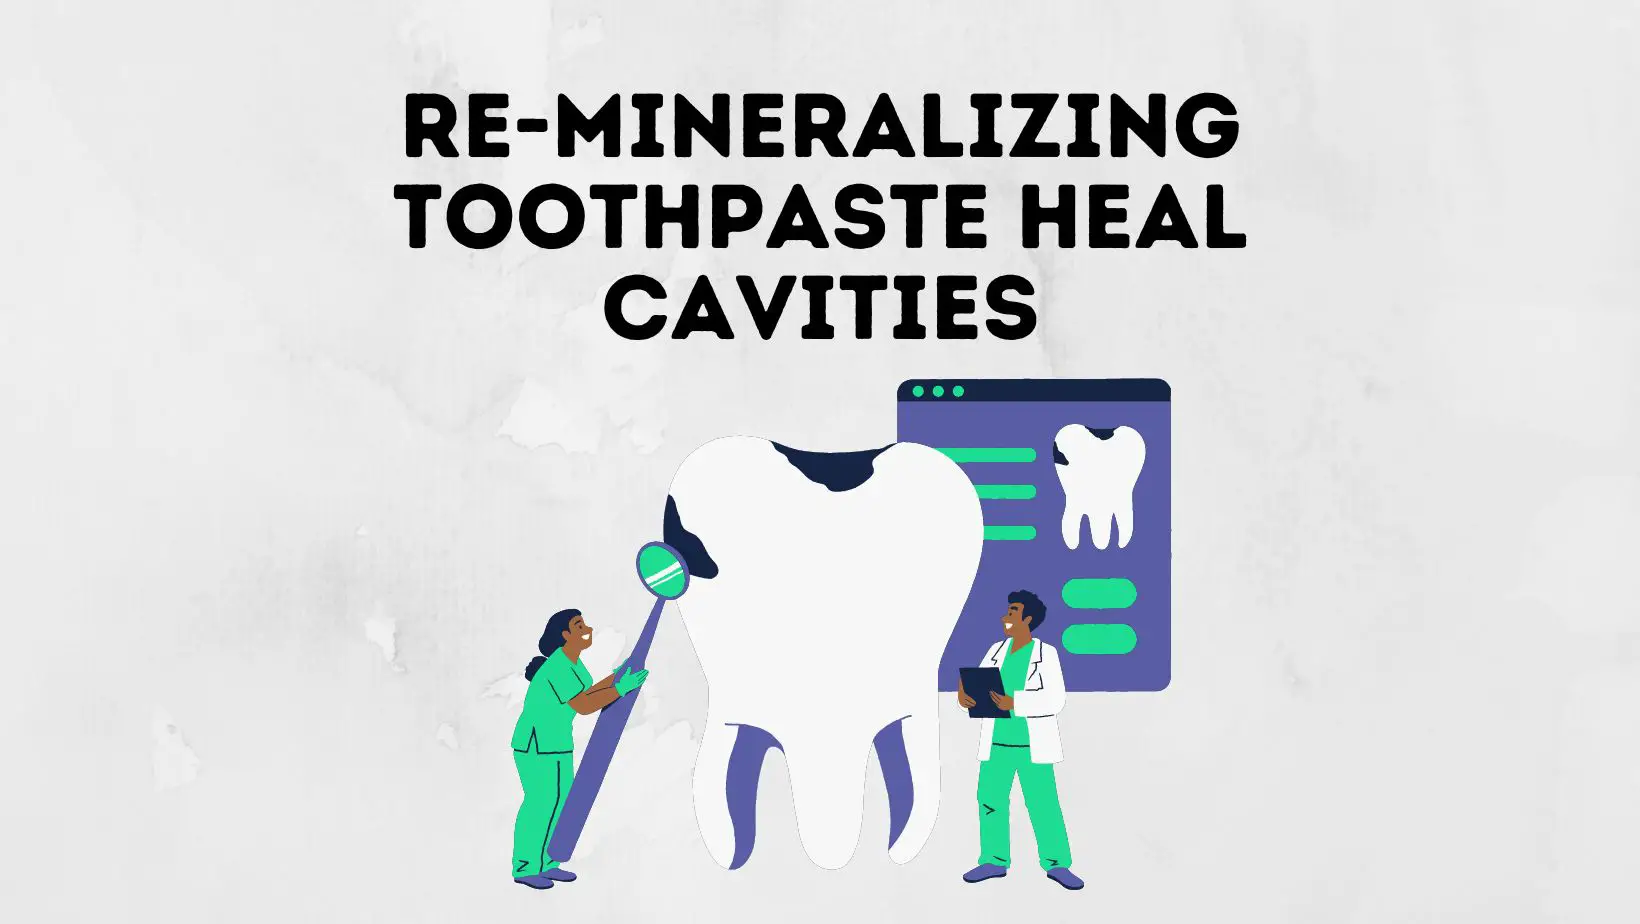 Can Remineralizing Toothpaste Heal Cavities